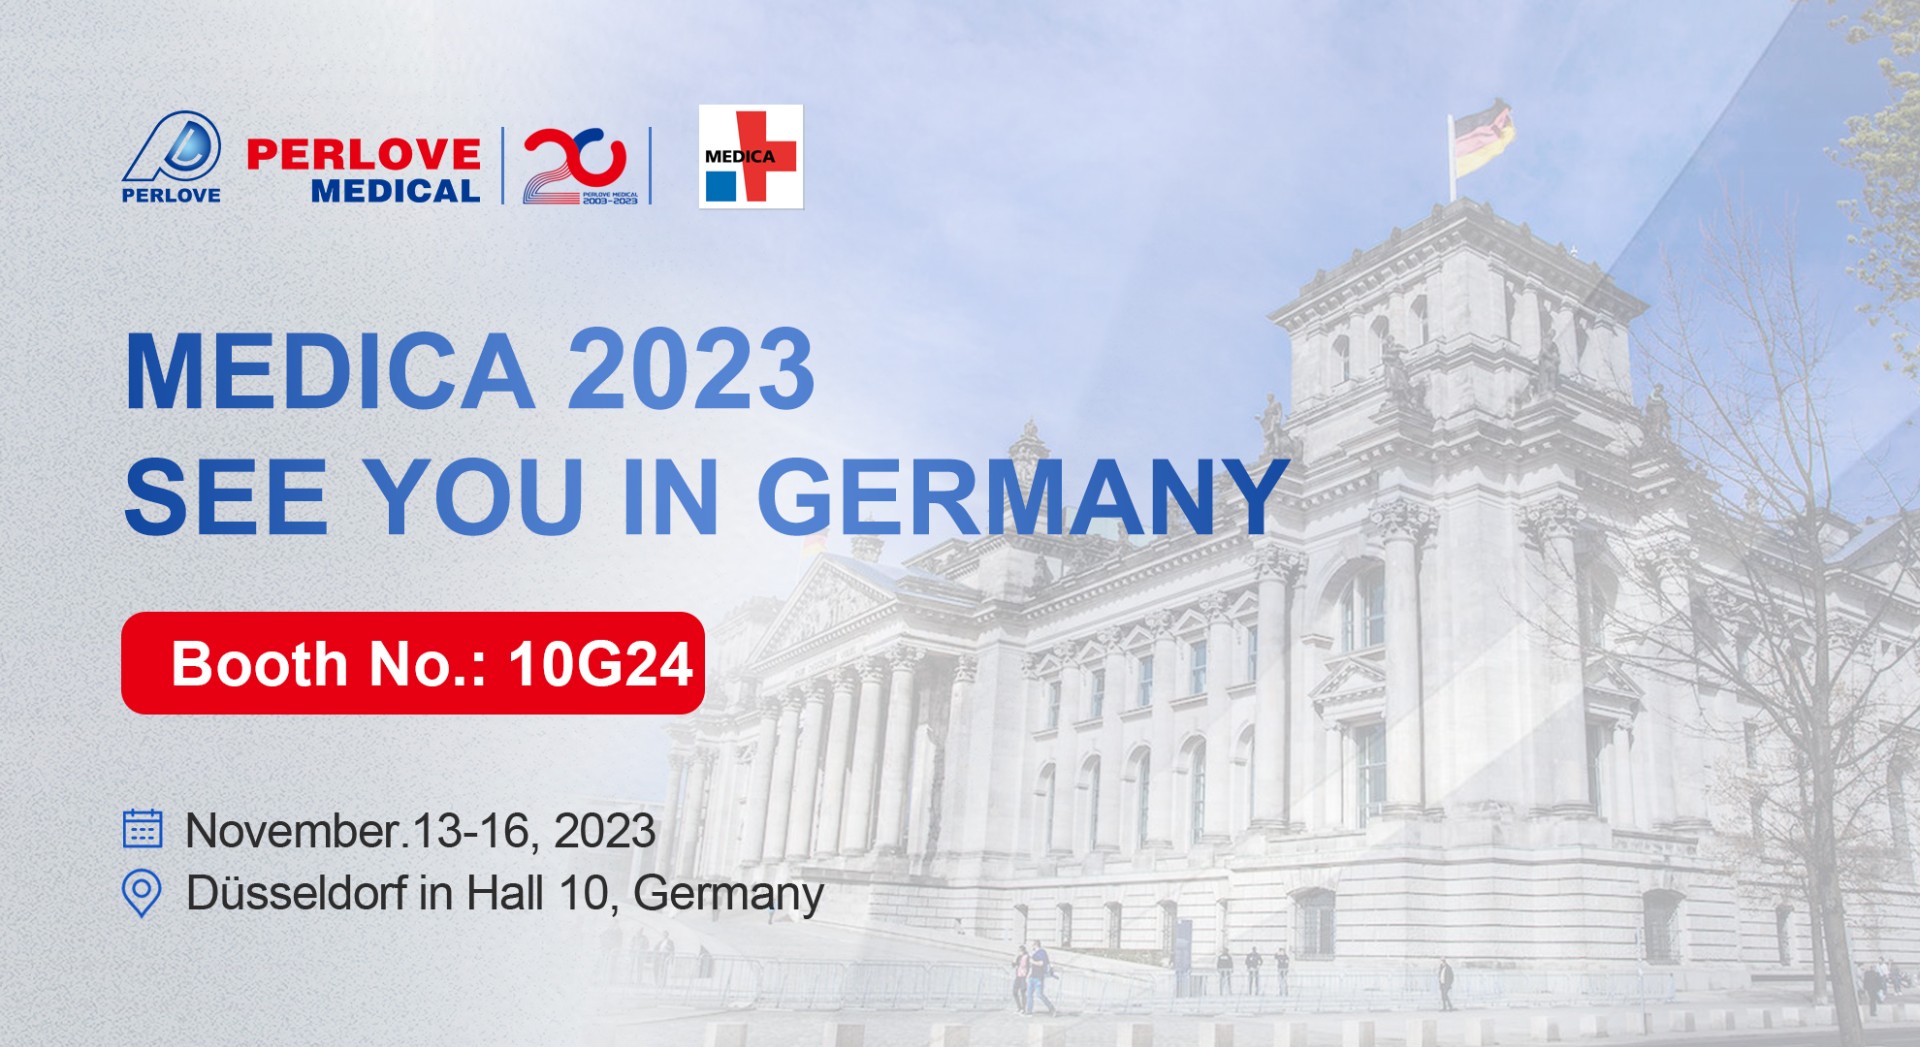 Discover the Future of Healthcare at MEDICA 2023 in Düsseldorf, Germany!